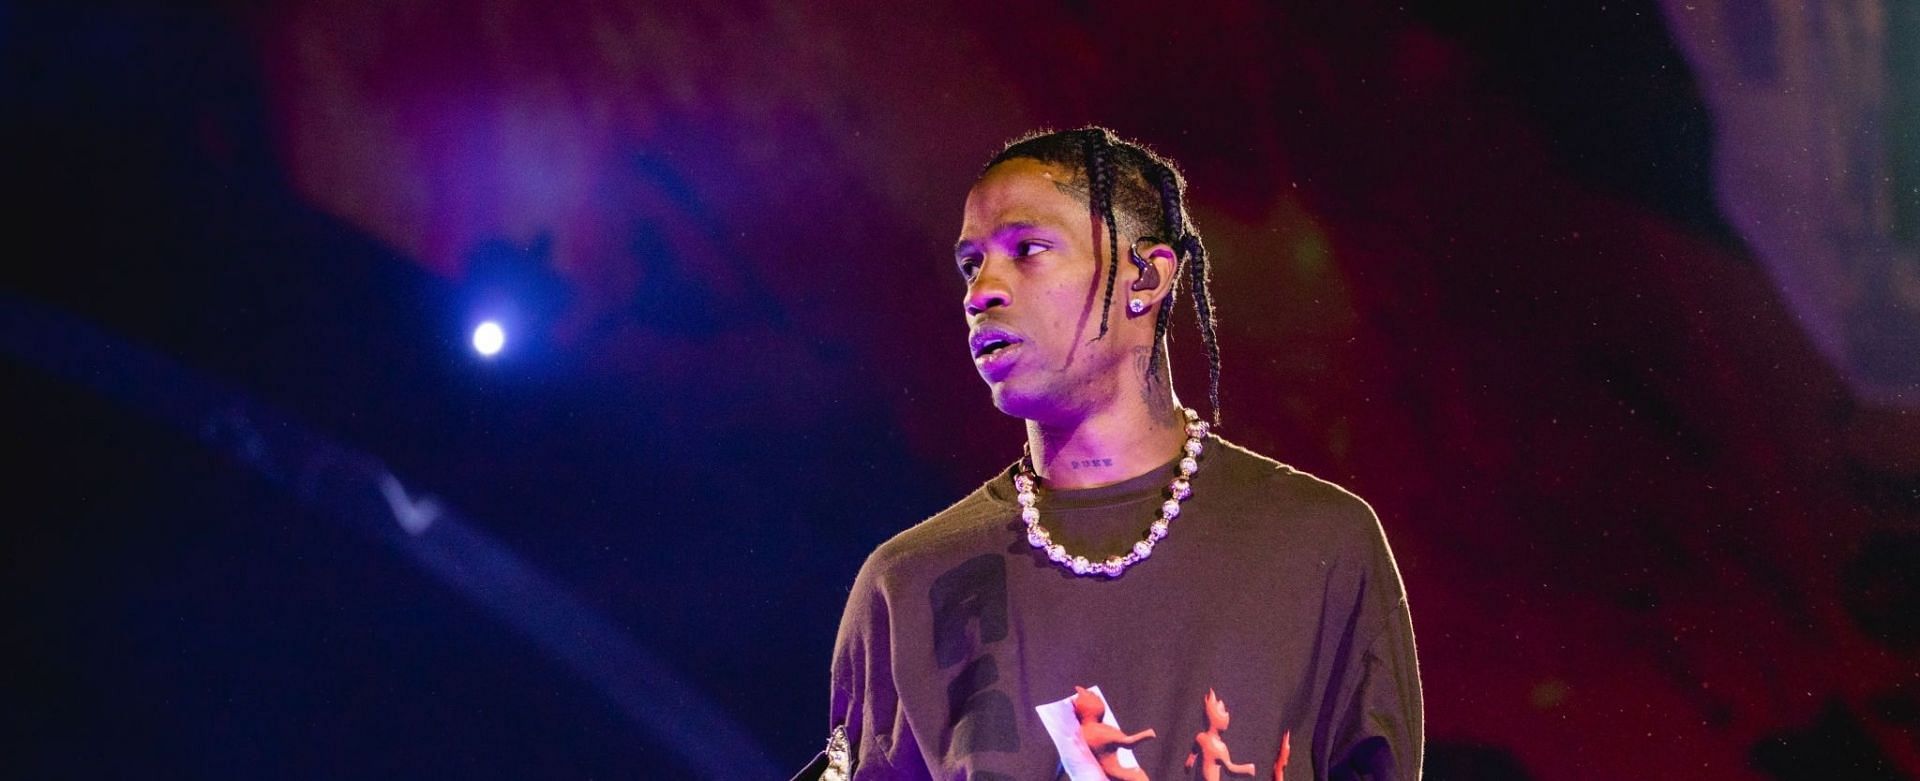 Travis Scott said he was unaware of Astroworld tragedy injuries during the concert (Image via Rick Kern/Getty Images)